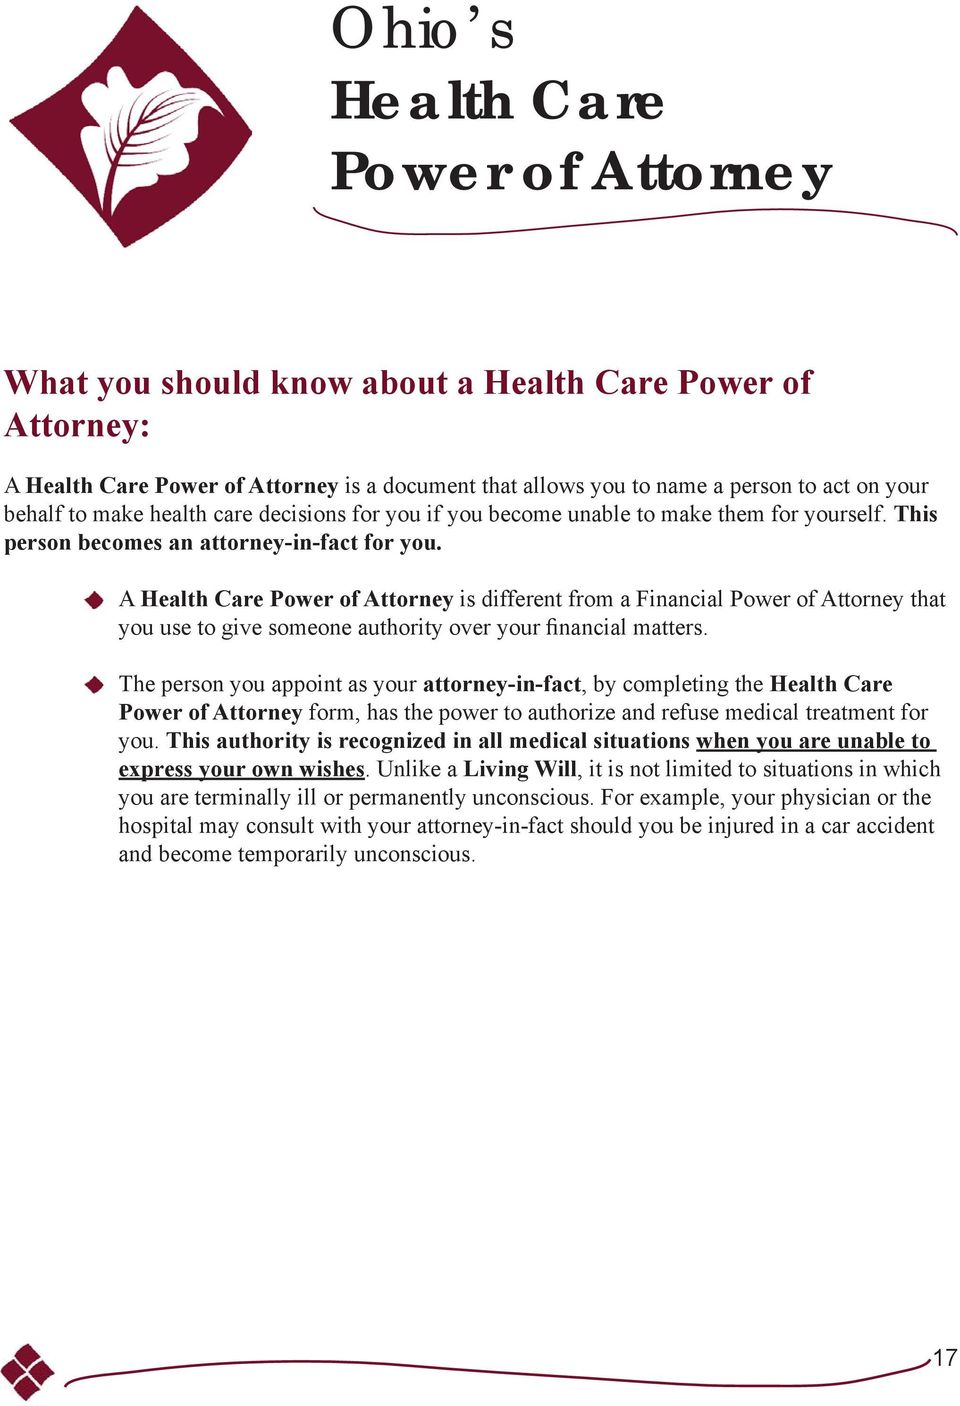 A Health Care Power of Attorney is different from a Financial Power of Attorney that you use to give someone authority over your financial matters.